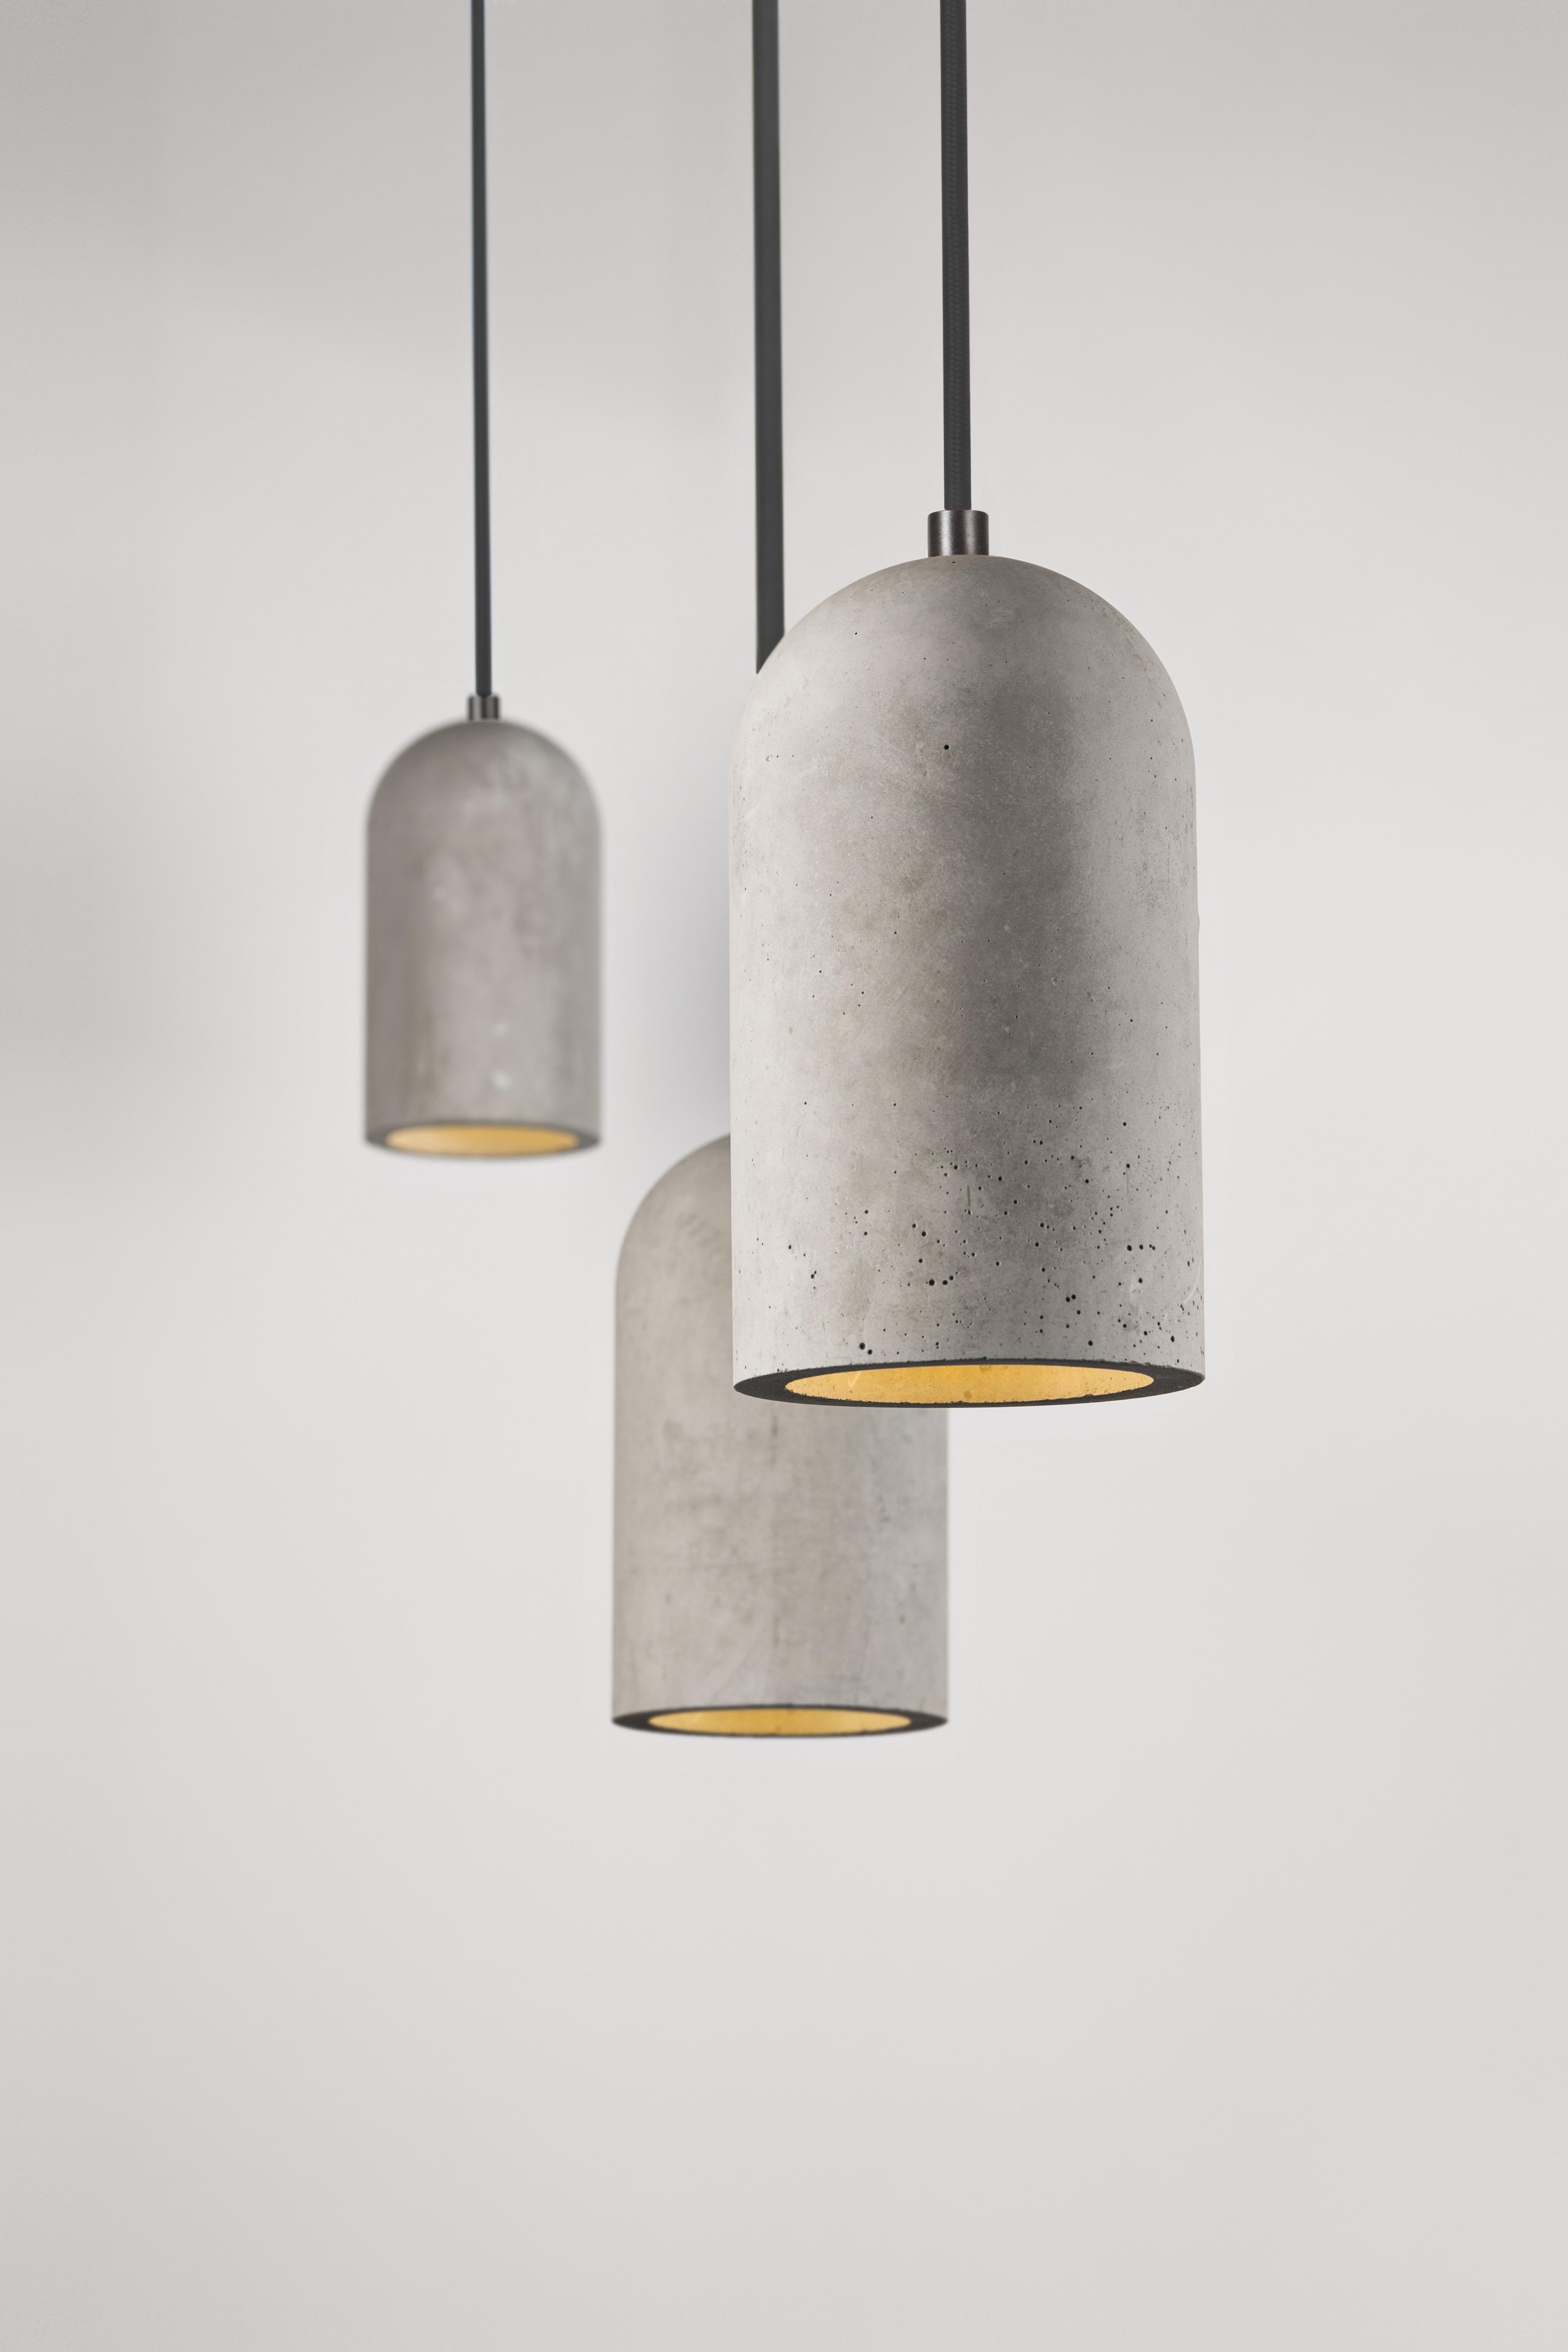 Chinese Concrete Pendant Lamp, “U, ” from Concrete Collection by Bentu